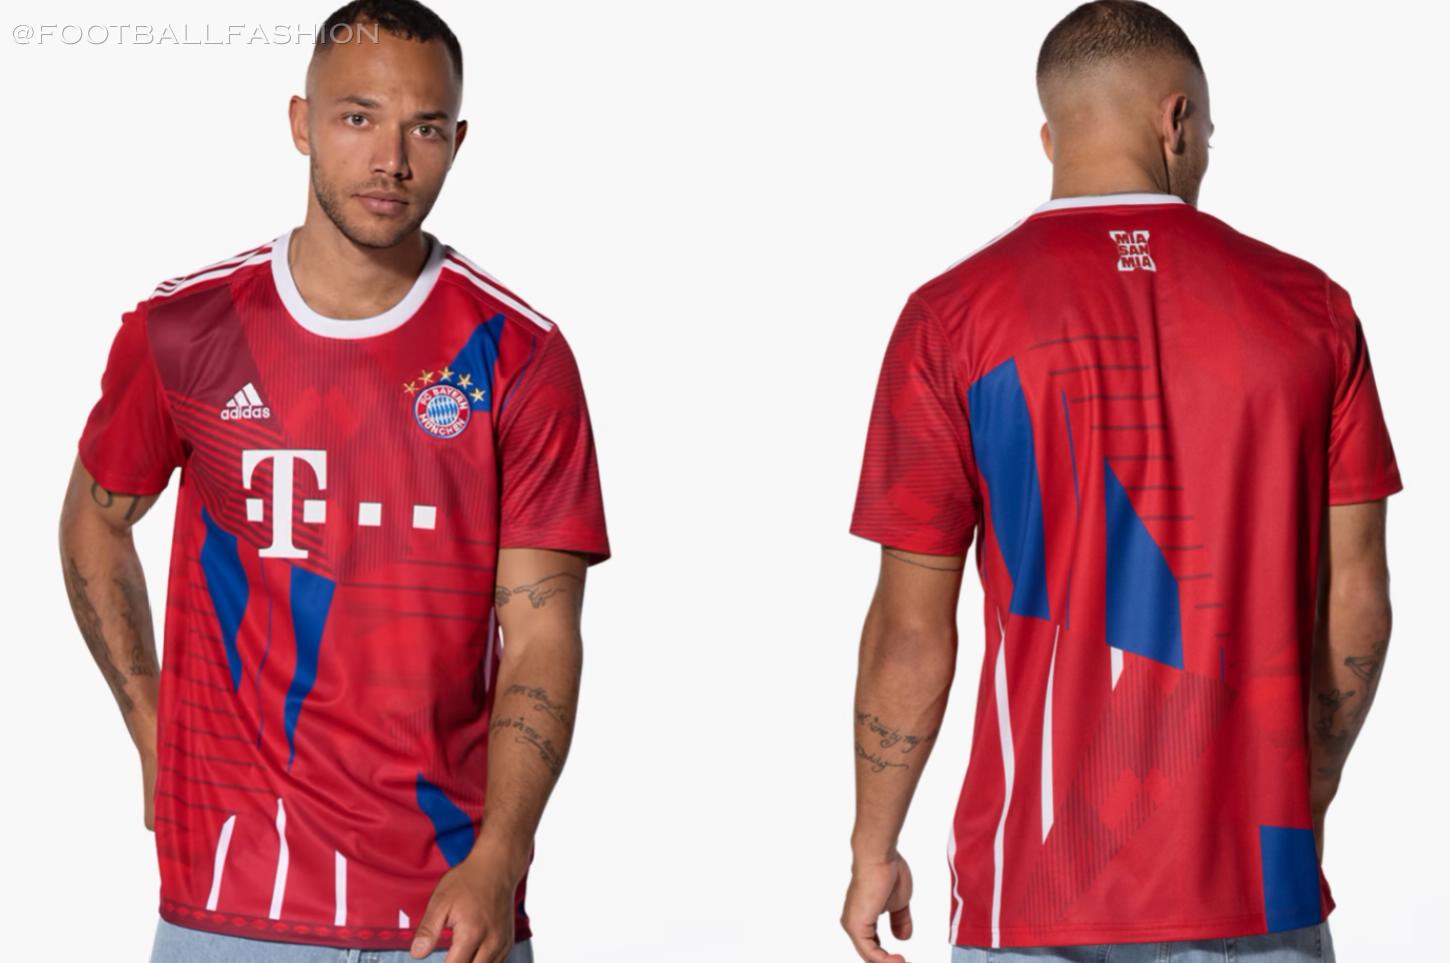 FC Bayern's new UCL jersey: appeal of home and history